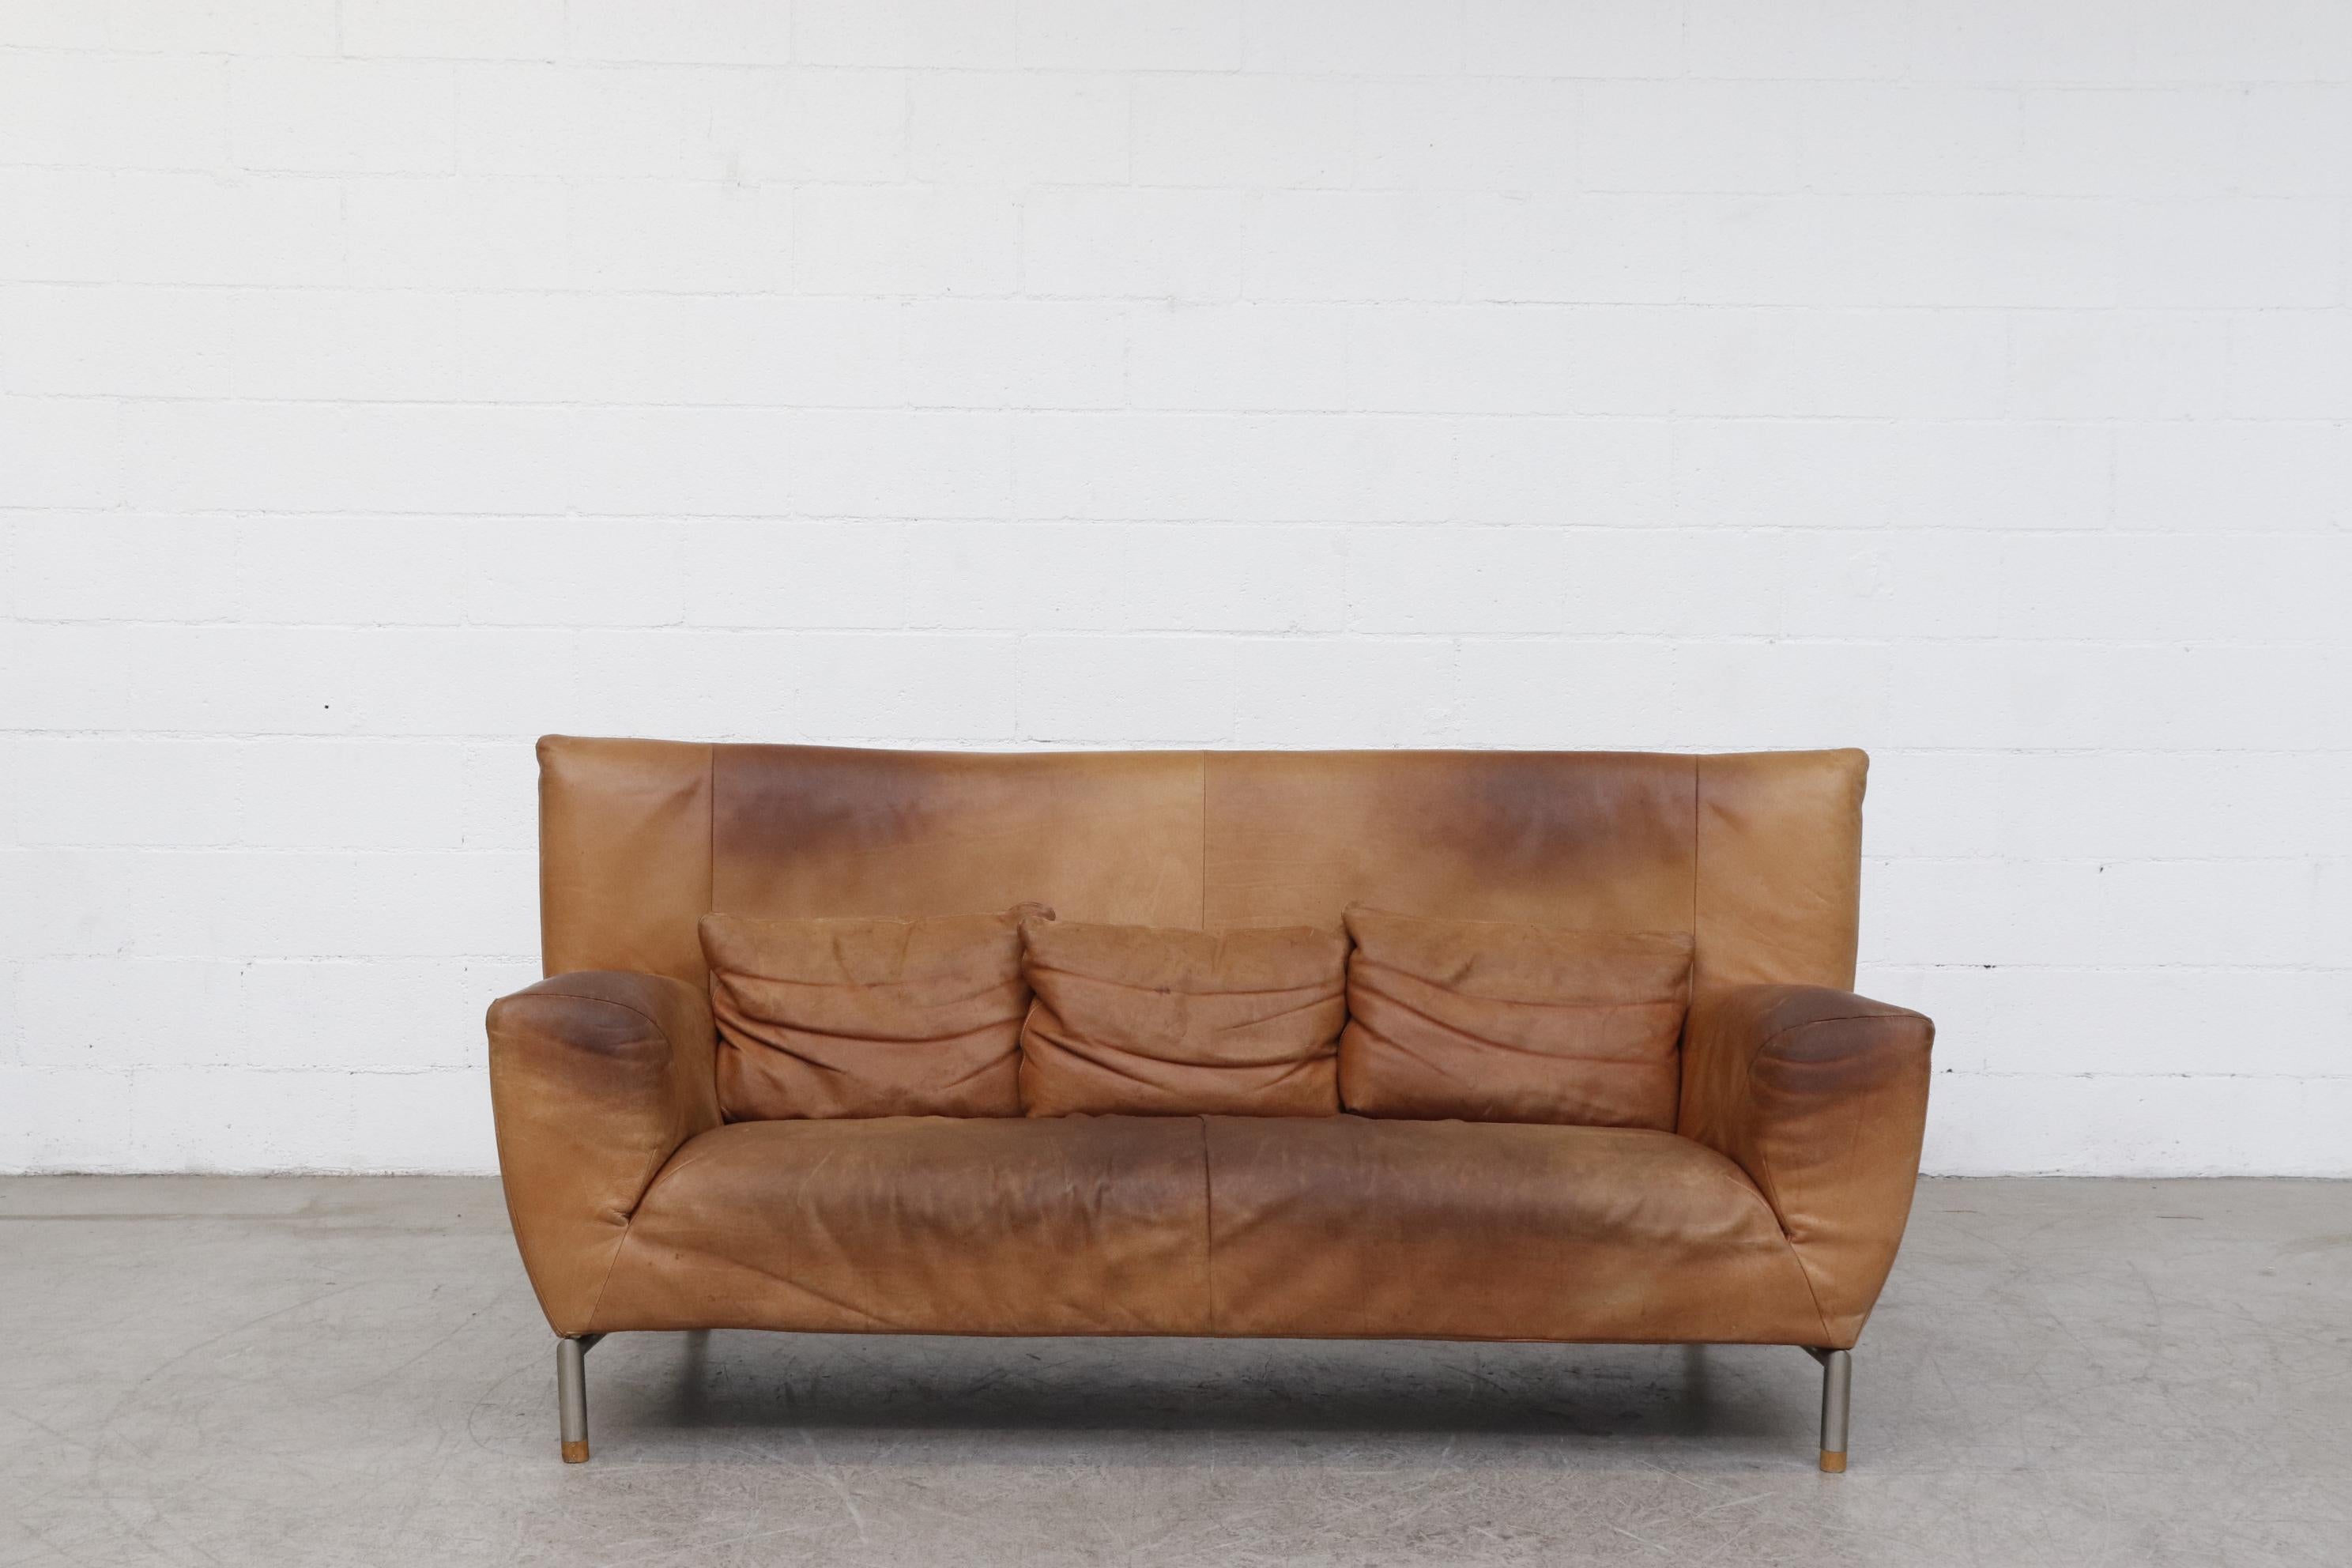 Modern Gerard Van Den Berg high back natural leather sofa with tubular metal legs and wood foot caps and 3 matching pillows. Visible natural patina. In original condition with wear consistent with its age and usage. Color may vary slightly from